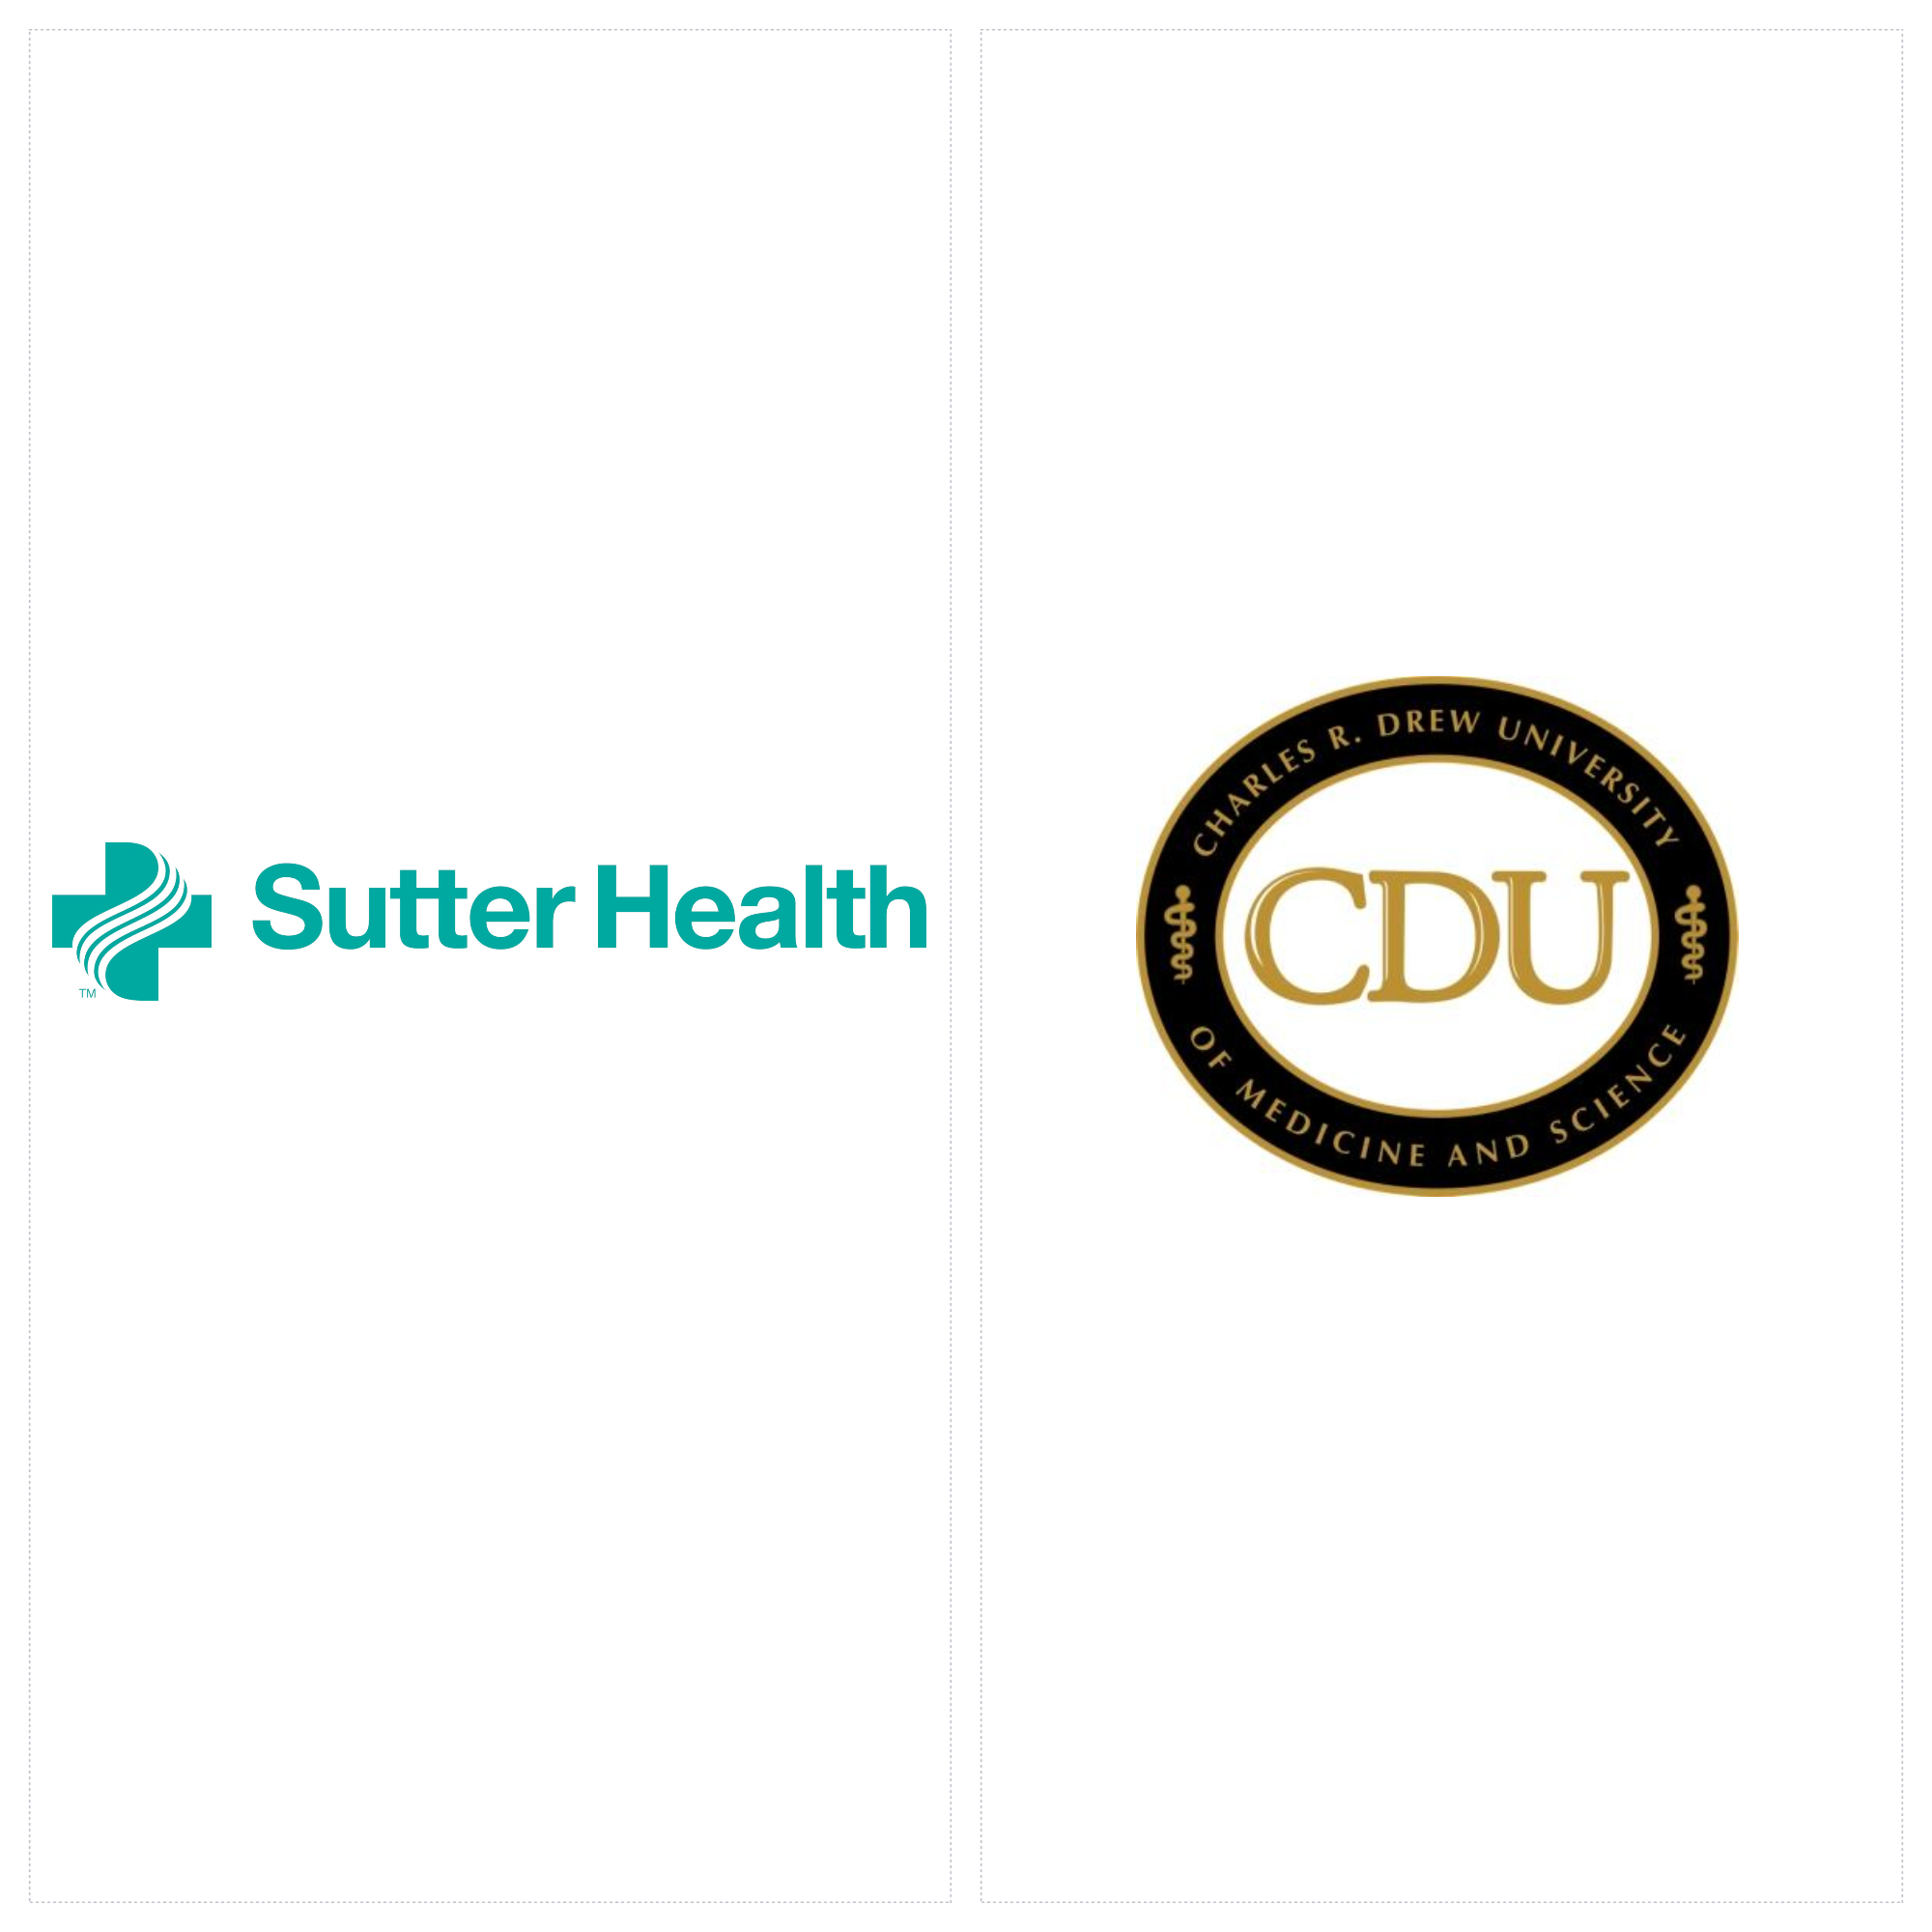 Sutter Health and Ch